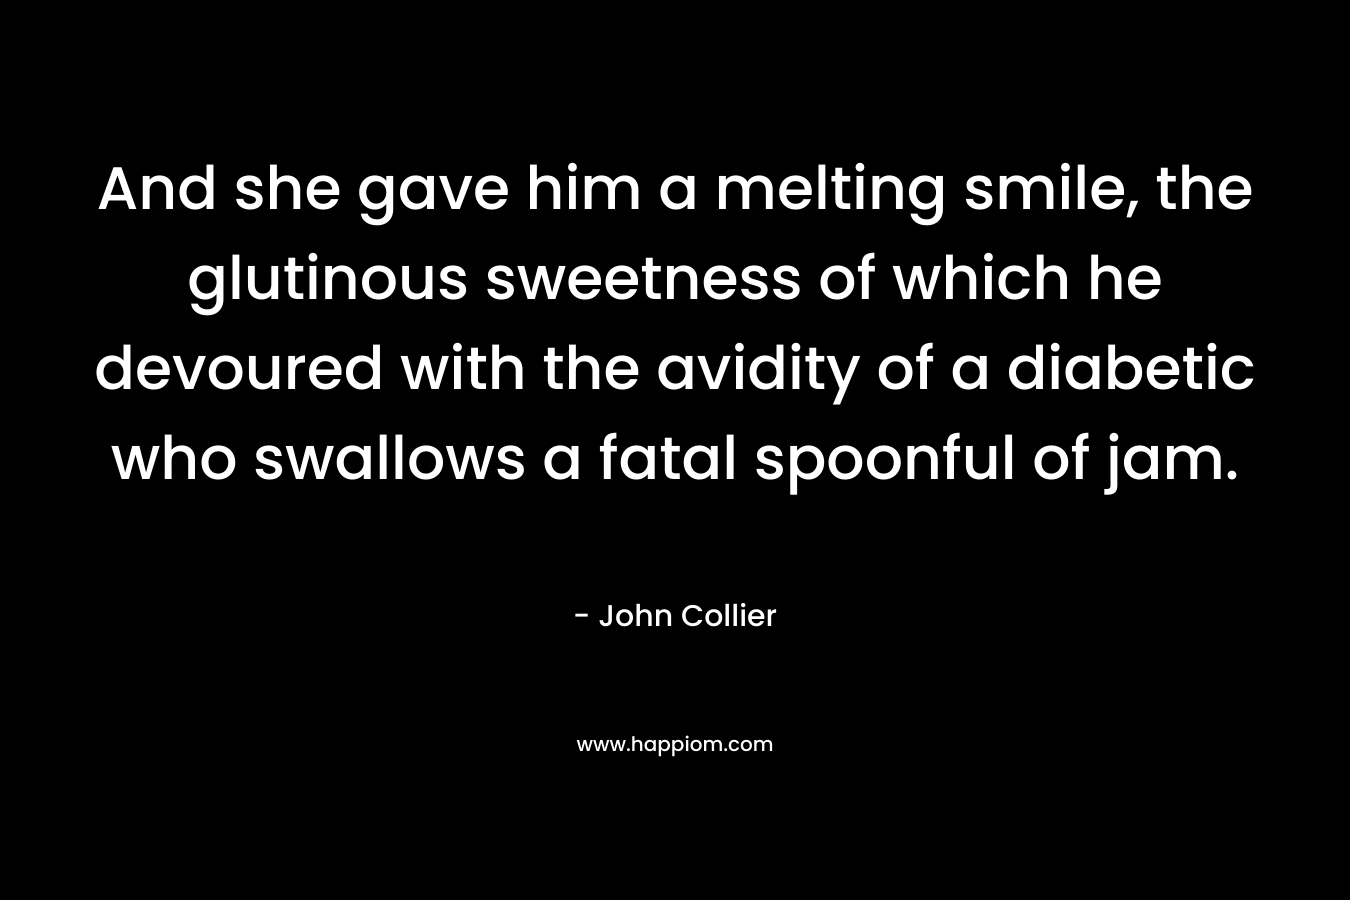 And she gave him a melting smile, the glutinous sweetness of which he devoured with the avidity of a diabetic who swallows a fatal spoonful of jam. – John Collier